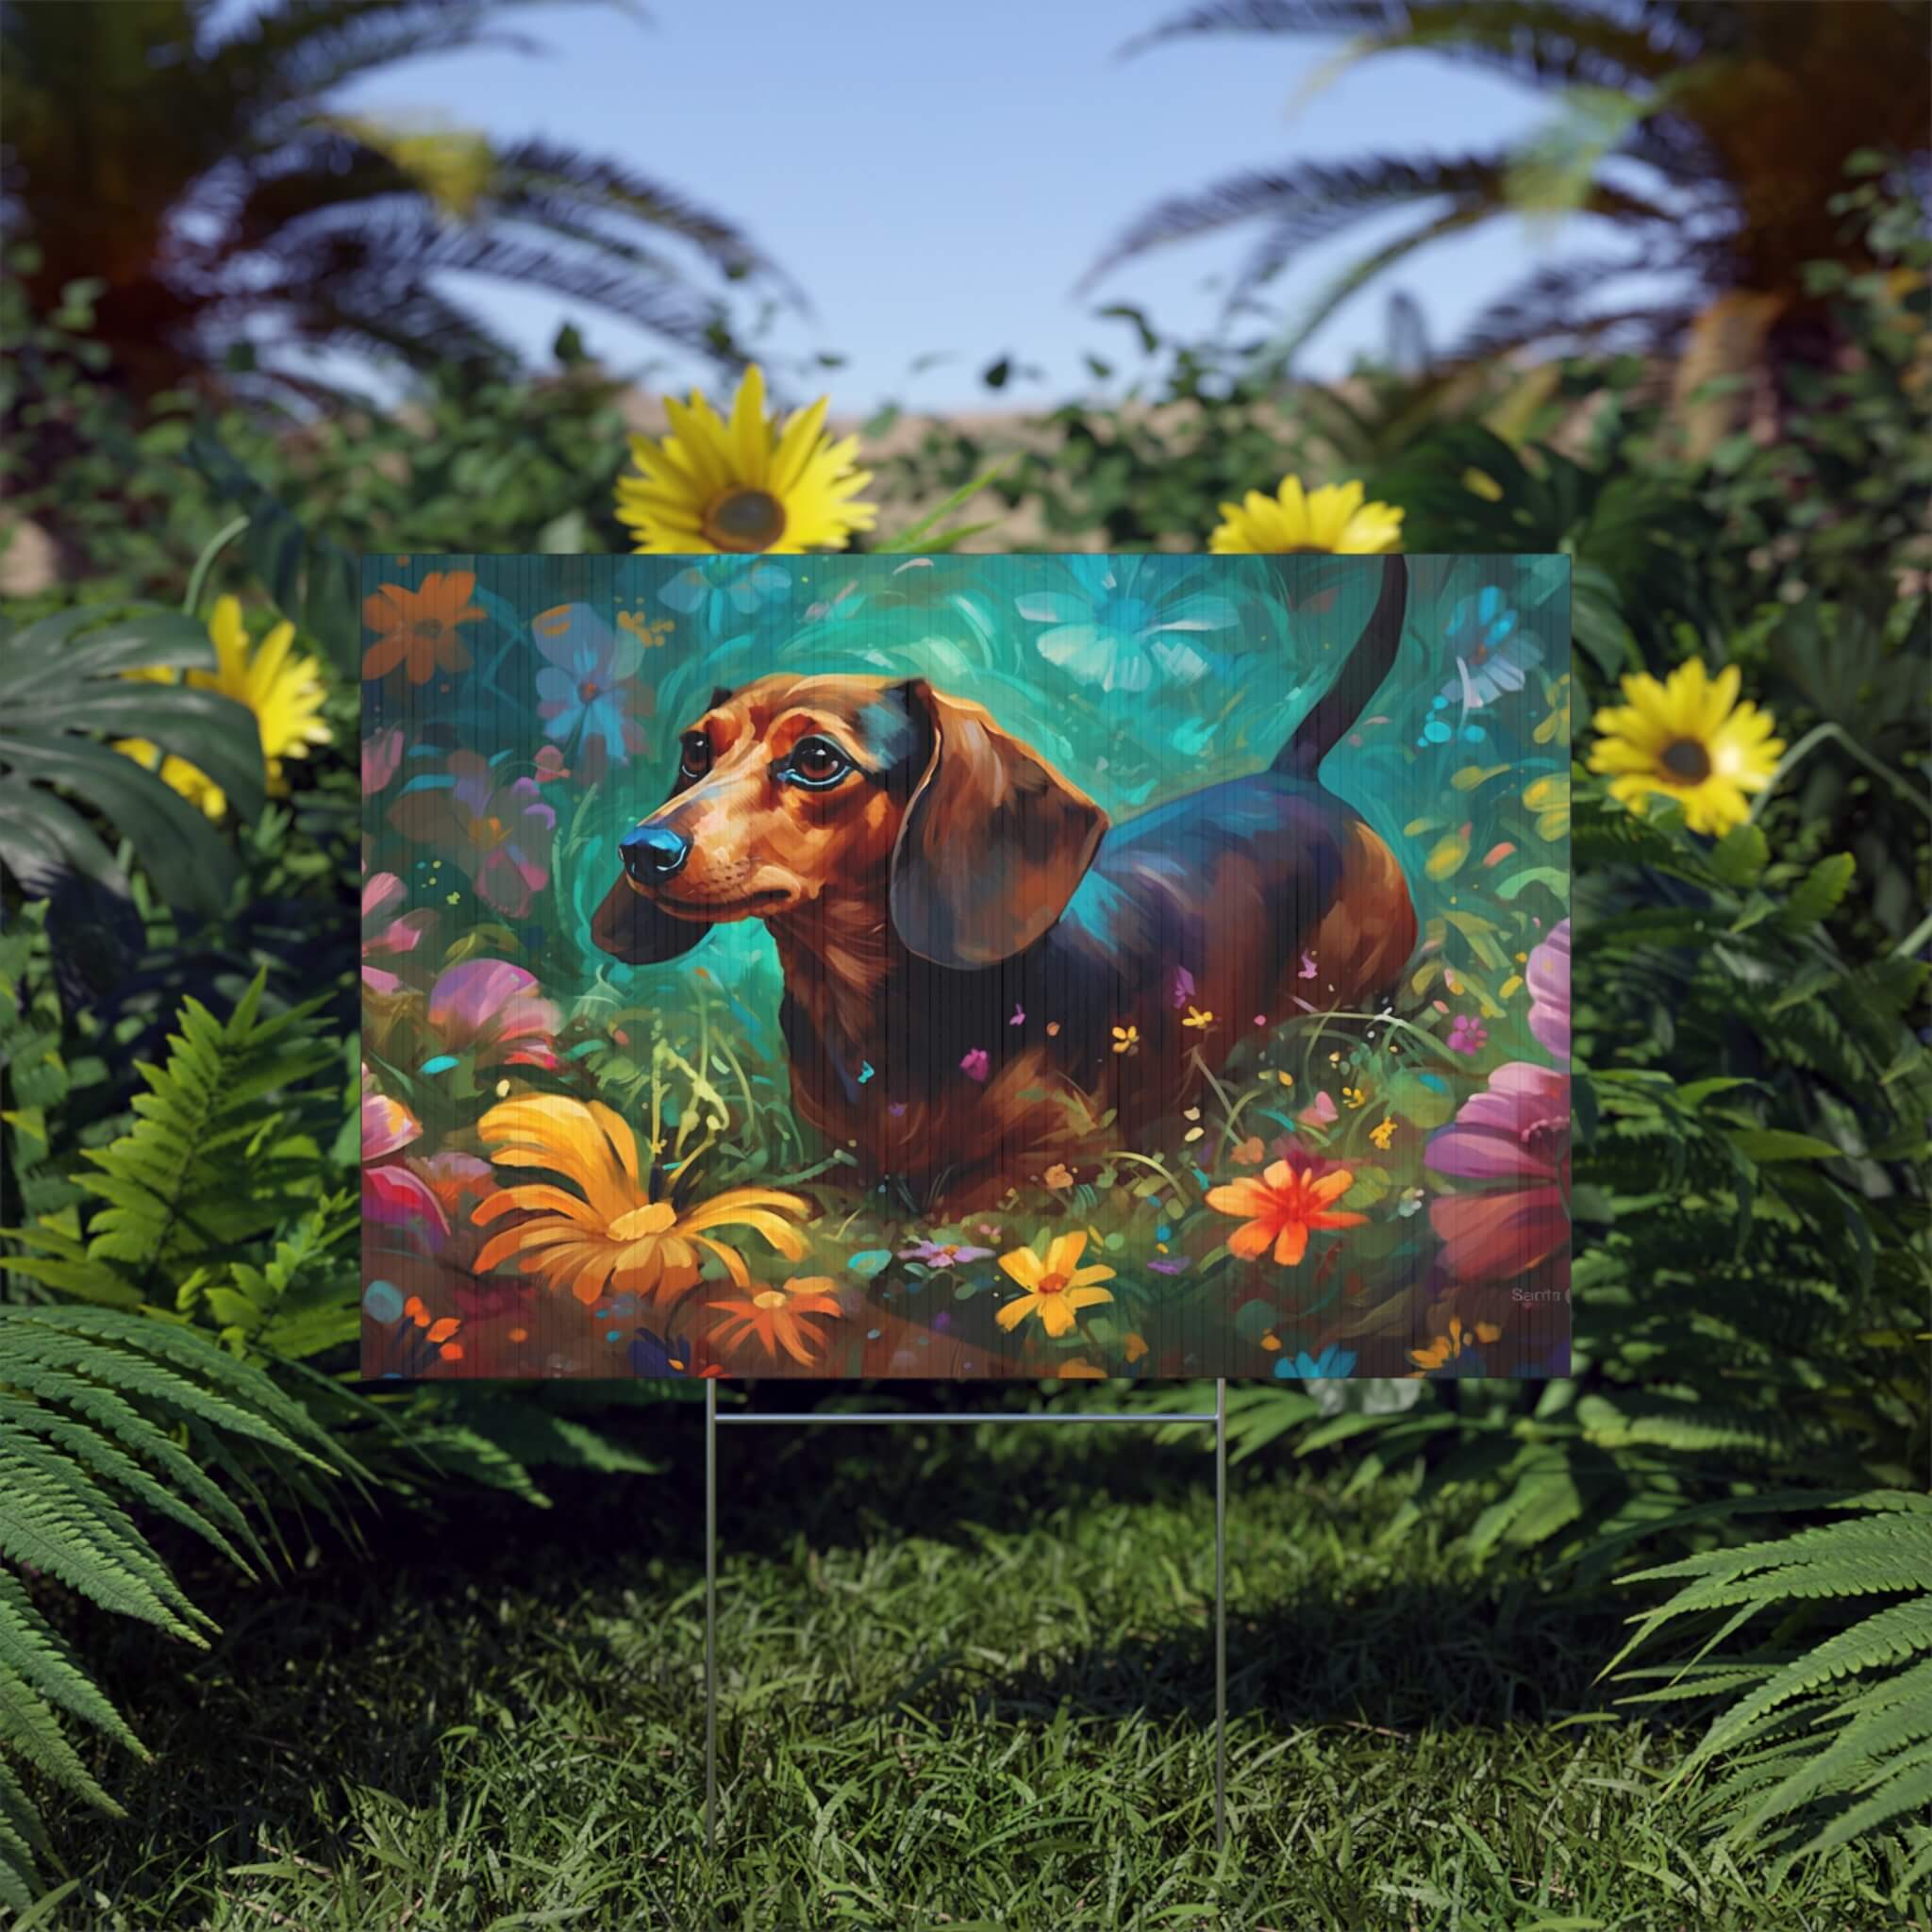 Spruce Up Your Outdoor Space with Dachshund Outdoor Decor: Because Wiener Dogs Make Everything Better!